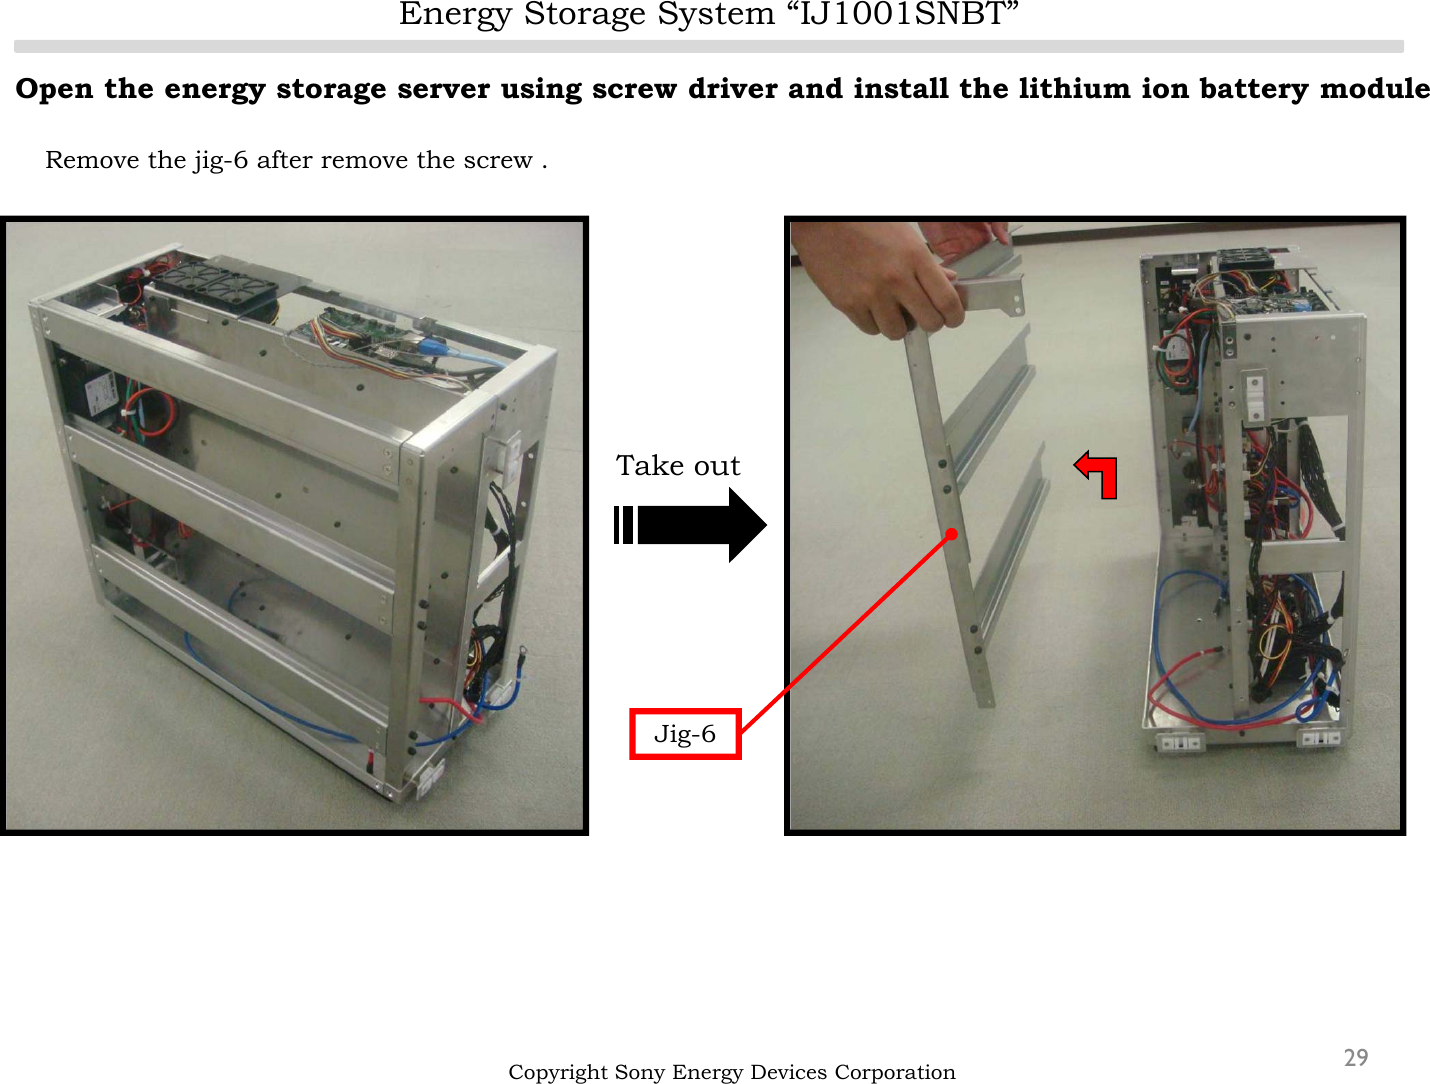 Energy Storage System “IJ1001SNBT”29Open the energy storage server using screw driver and install the lithium ion battery moduleRemove the jig-6 after remove the screw .Copyright Sony Energy Devices CorporationJig-6Take out